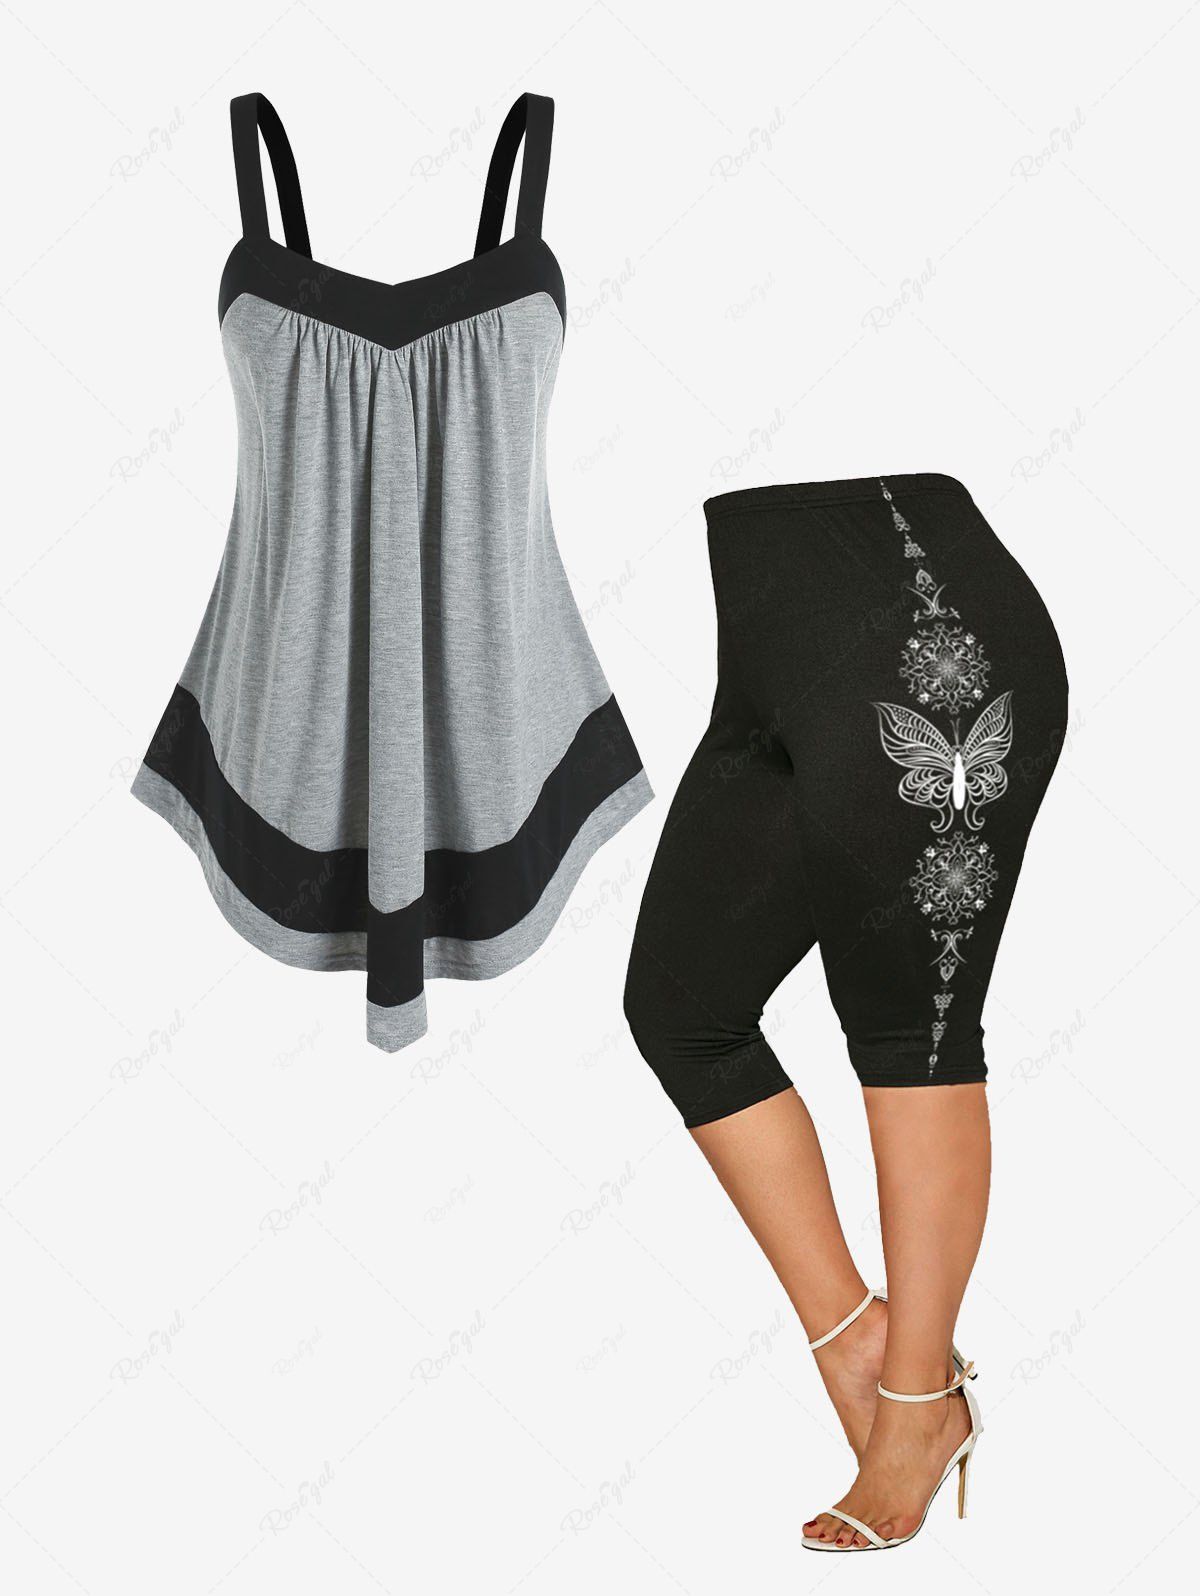 Shop Two Tone Swing Tank Top and Butterfly Print Capri Leggings Plus Size Summer Outfit  